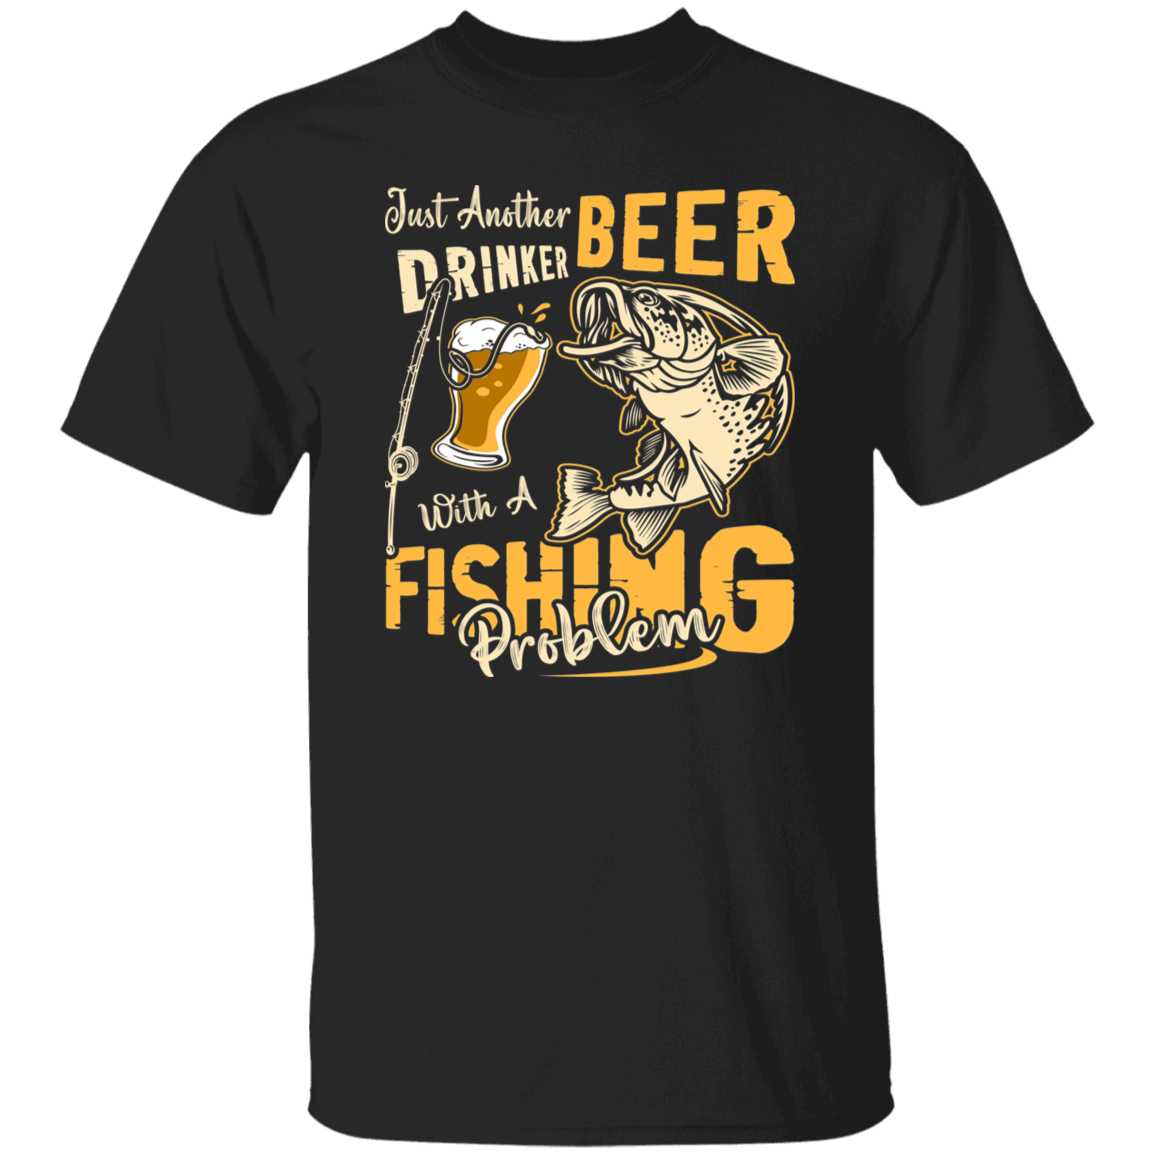 Just another Beer...T-Shirt